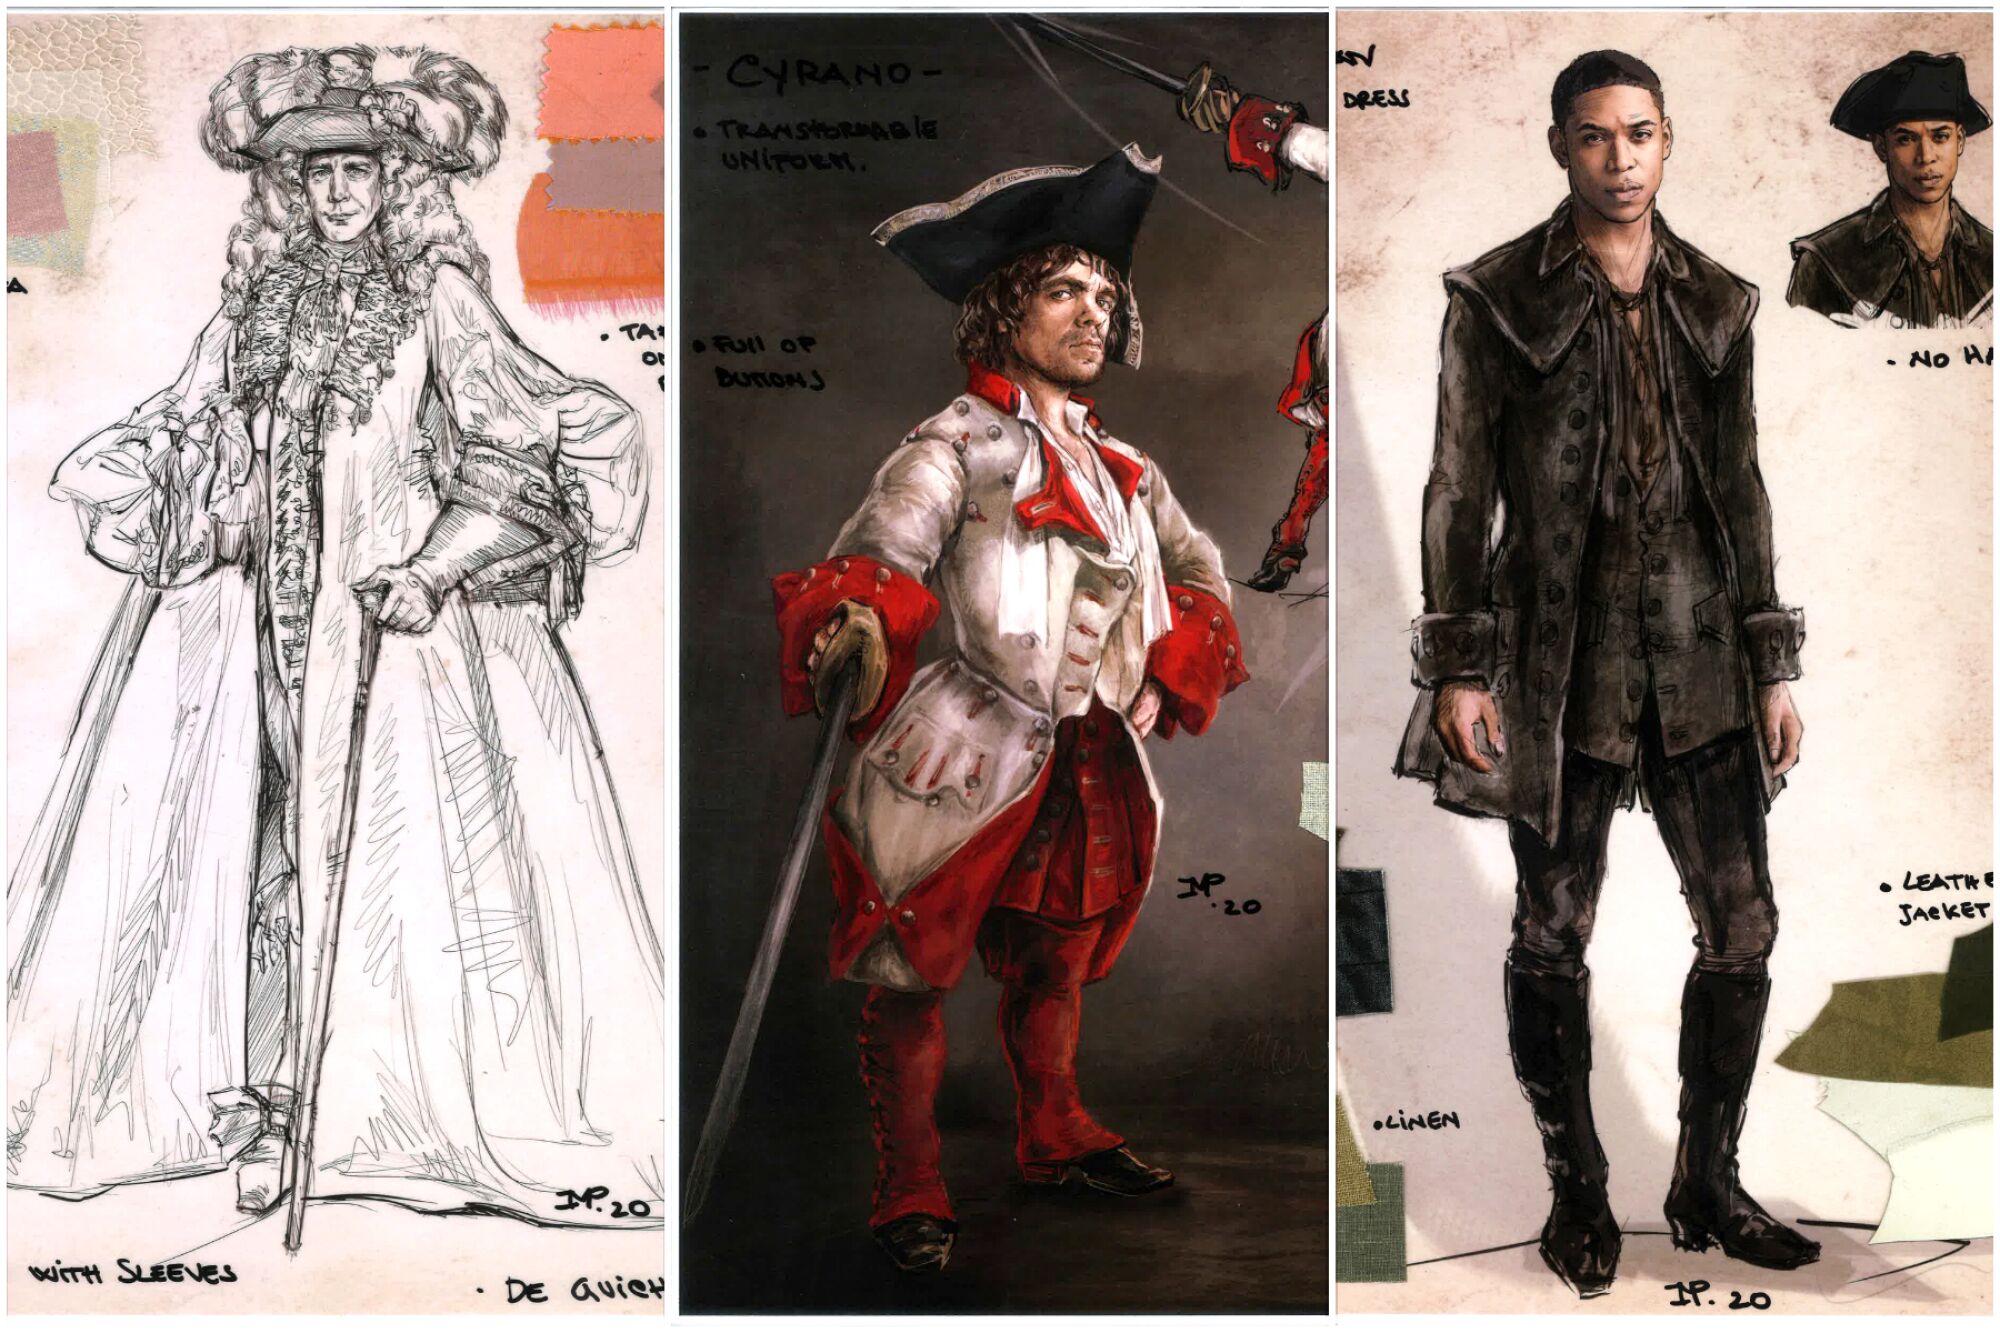 Sketches of costume designs for the characters De Guiche, Cyrano and Christian.